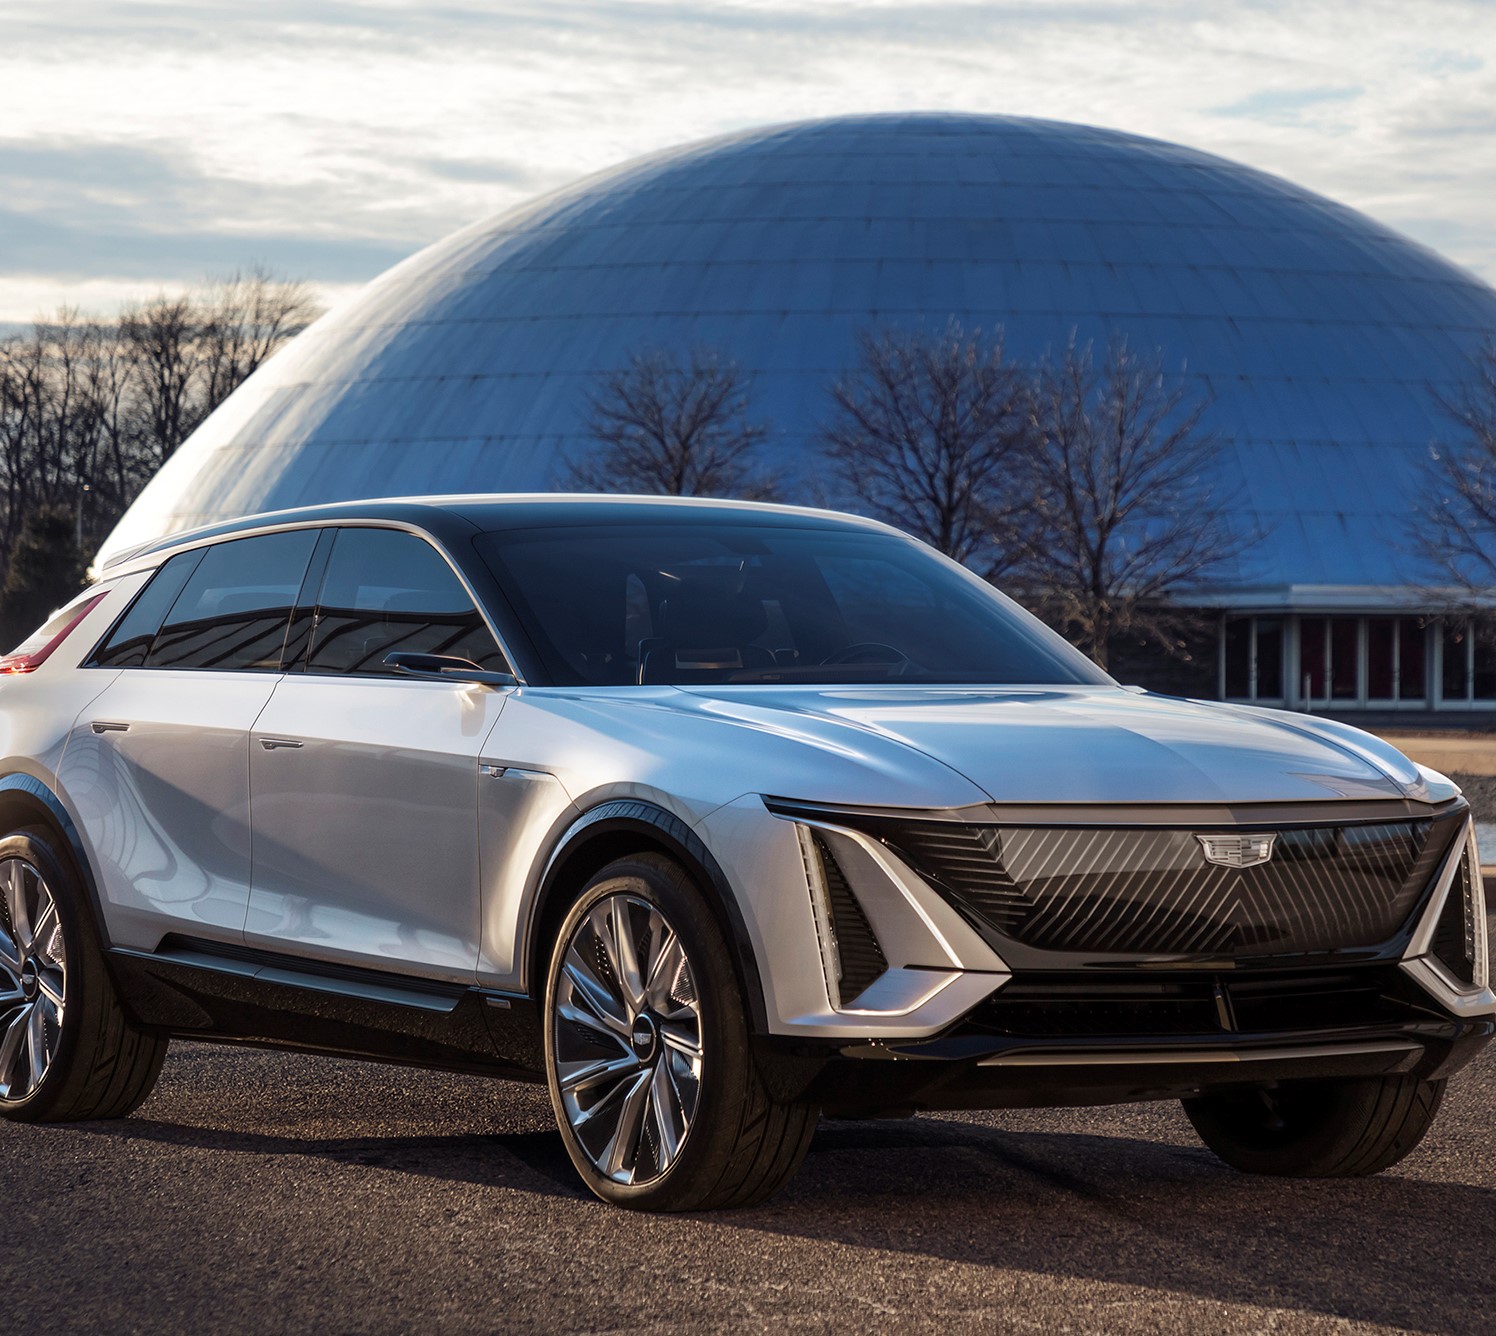 cadillac says new electric suv has features to take on tesla